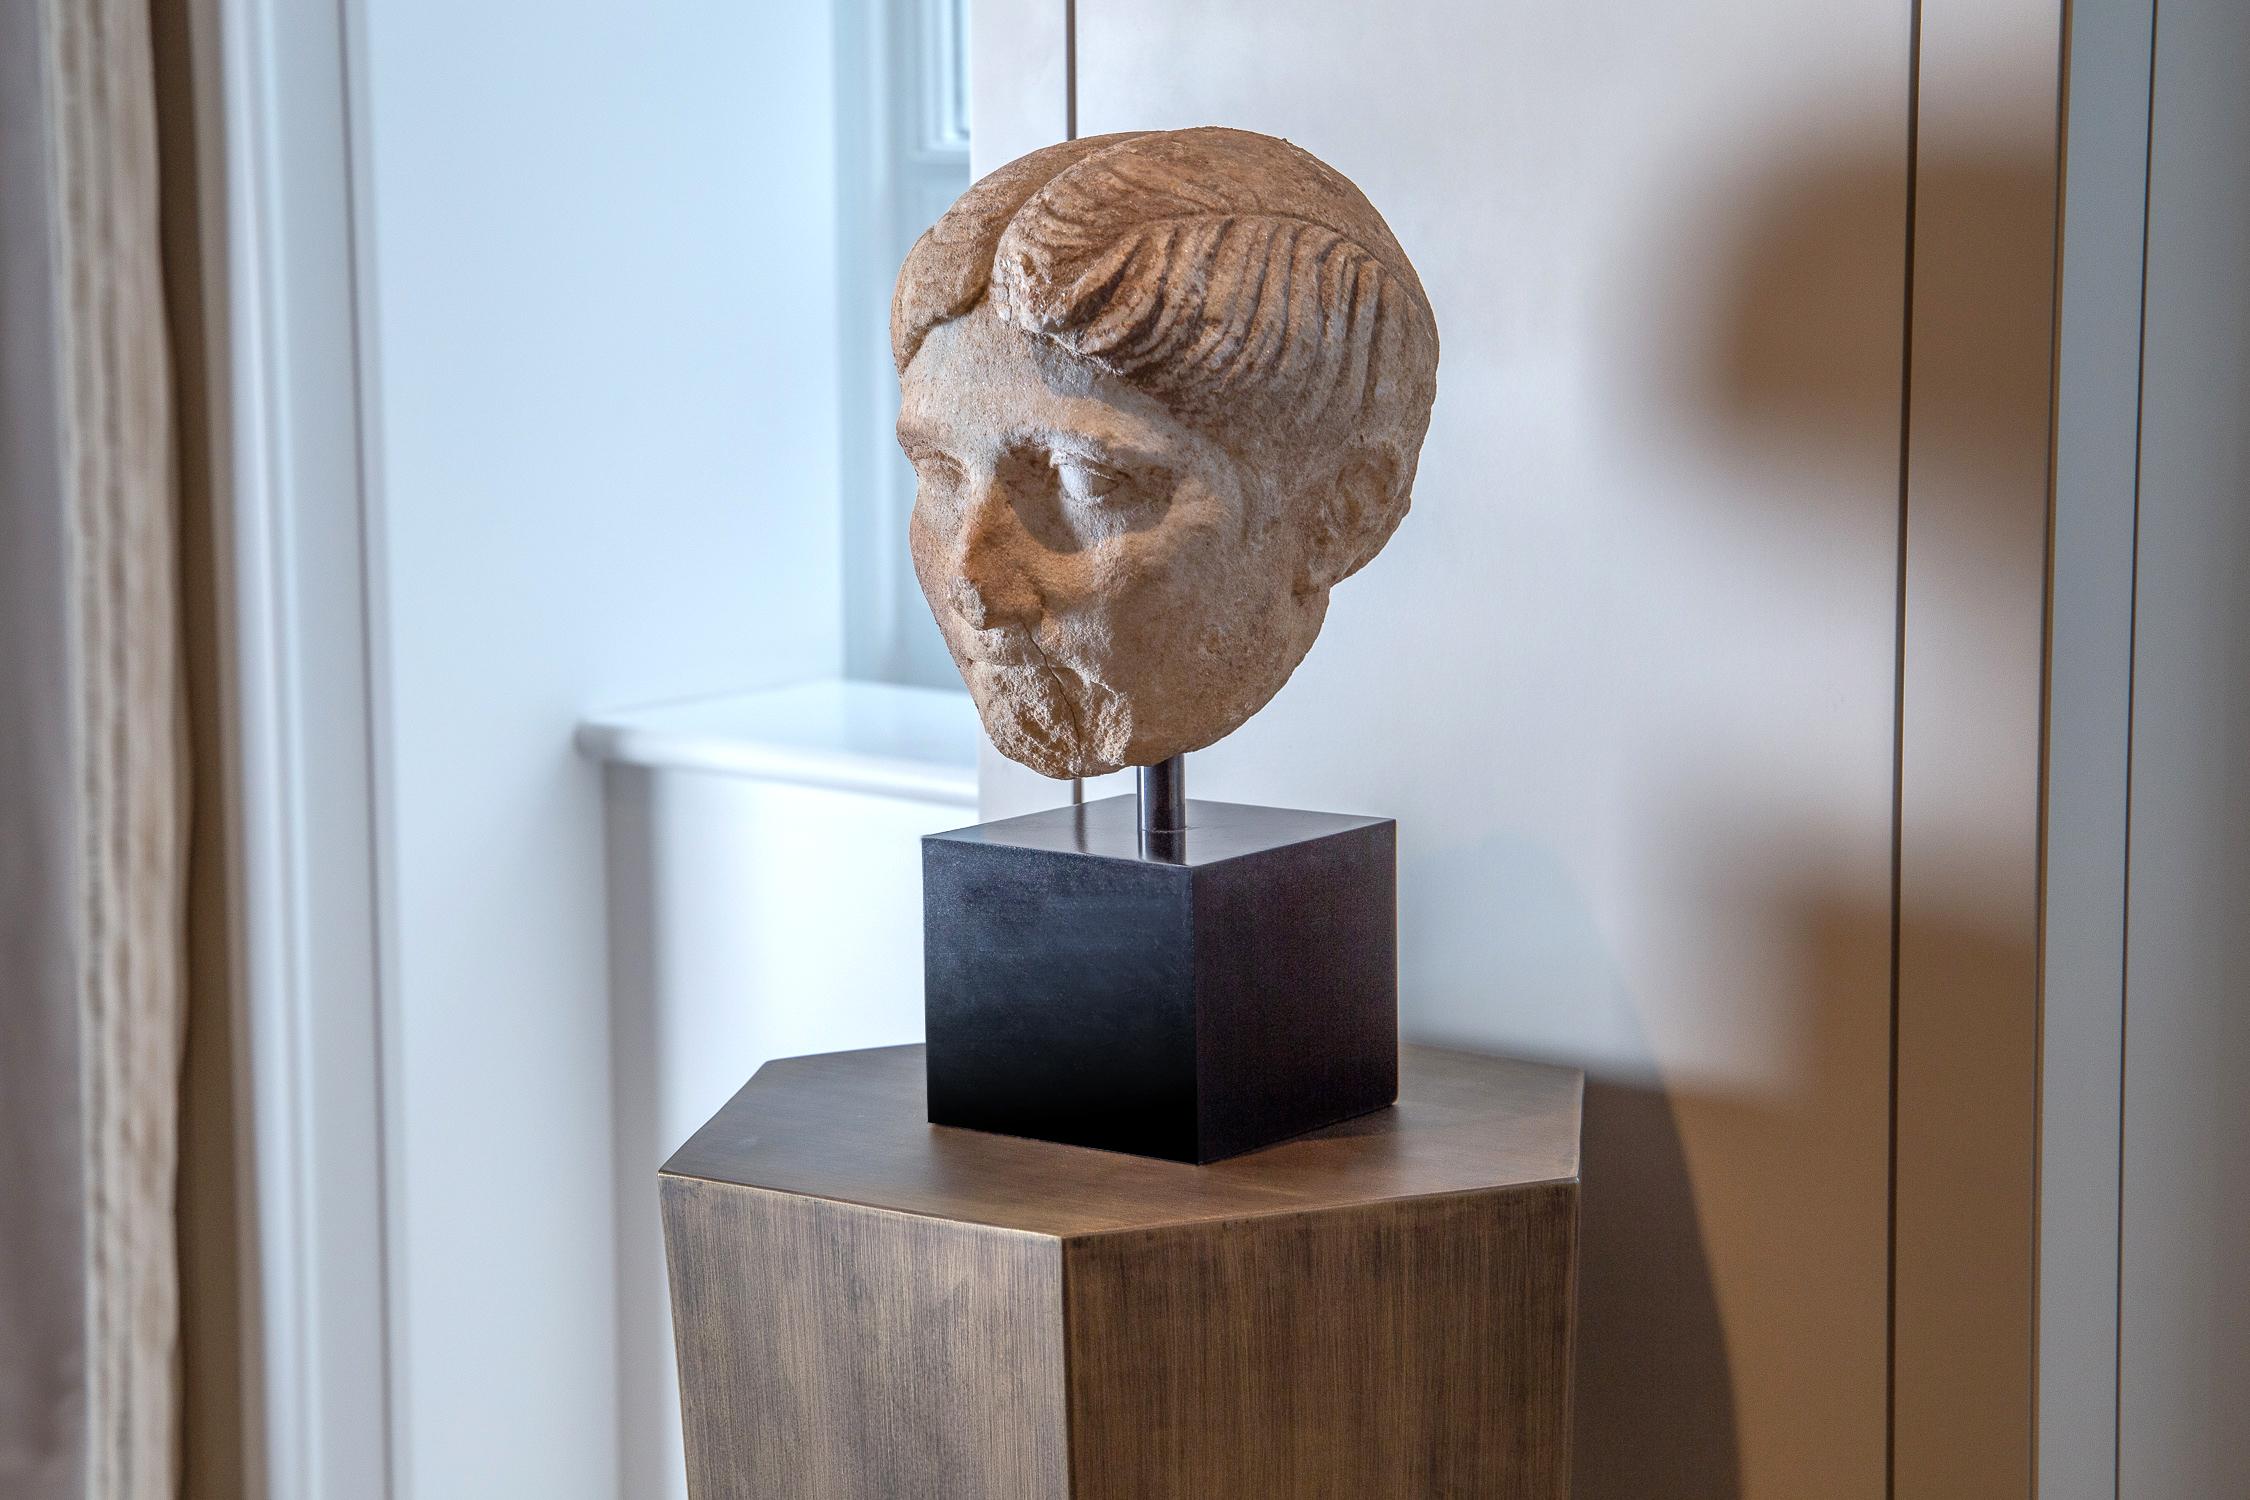 Julio-Claudian period, 1st century BC-1st century AD

Measures: Height with stand 37cm

A Roman lady represented with an oval face characterized by a beautifully rounded chin and slightly-full
lips, the eyes are framed by thin modelled brows,